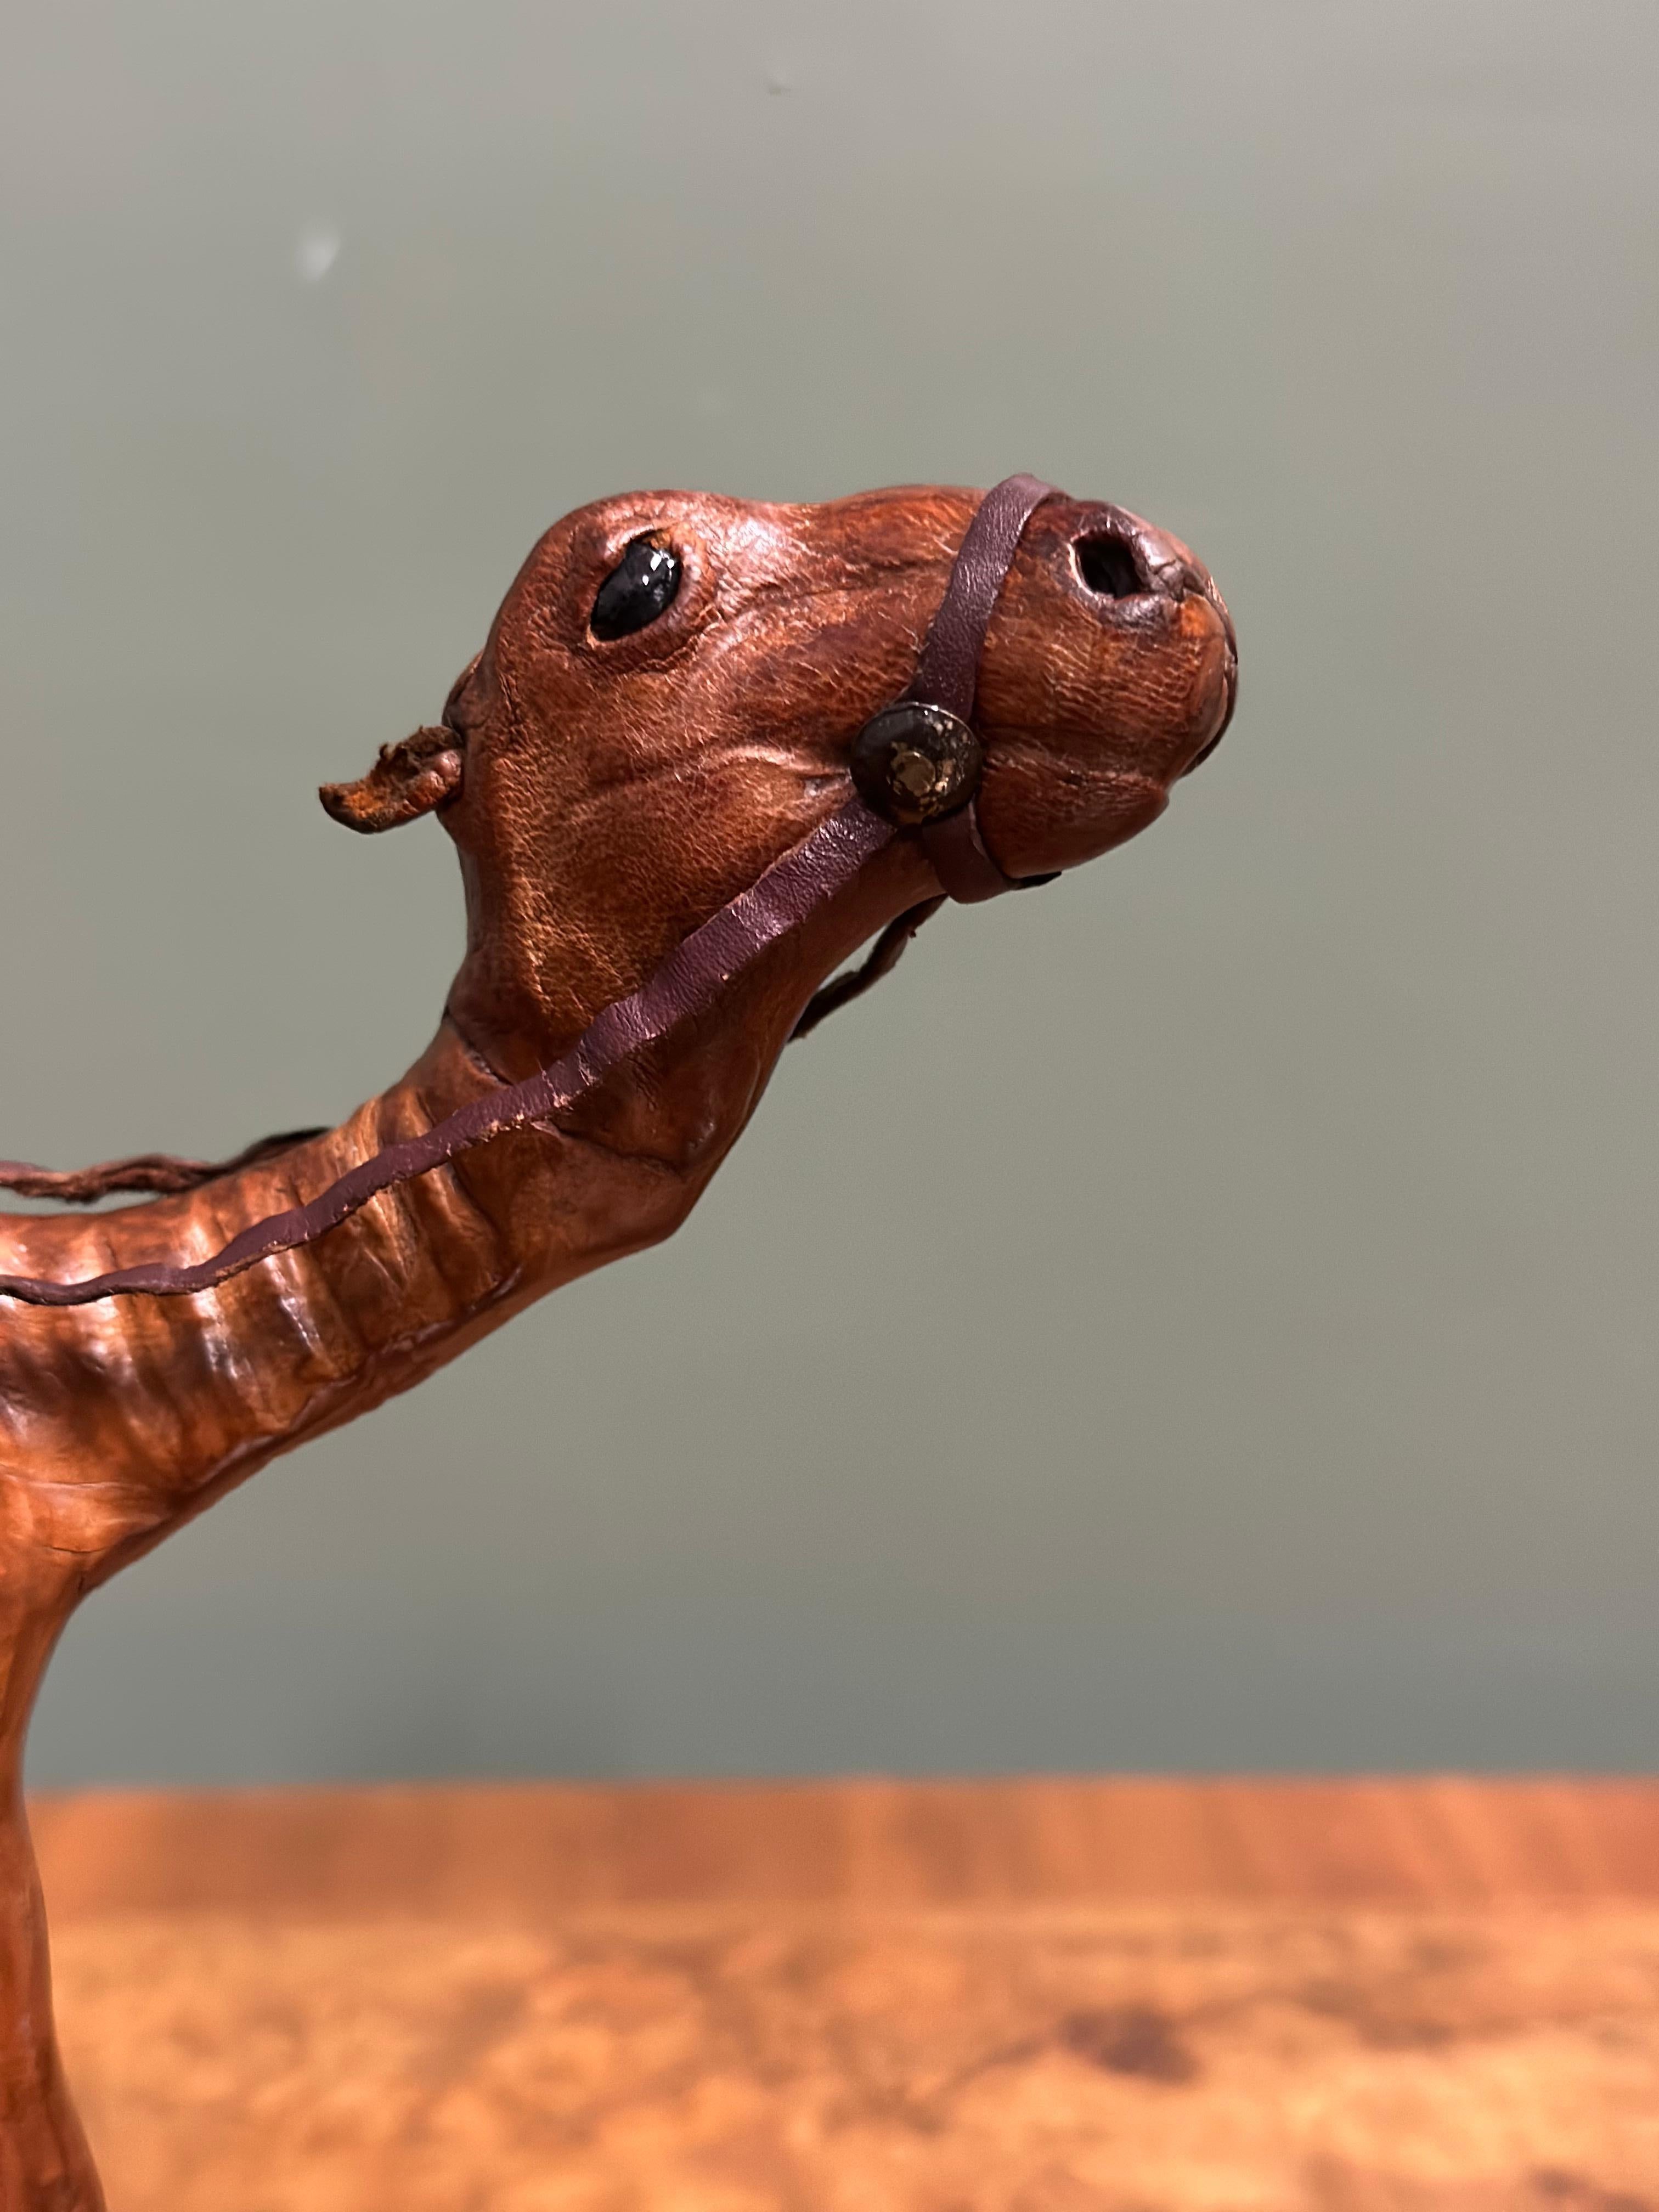 Leather LIBERTY'S LONDON CAMEL SCULPTURE WiTH LOVELY AGED LEATHER ON HAND CARVED WOOD  For Sale